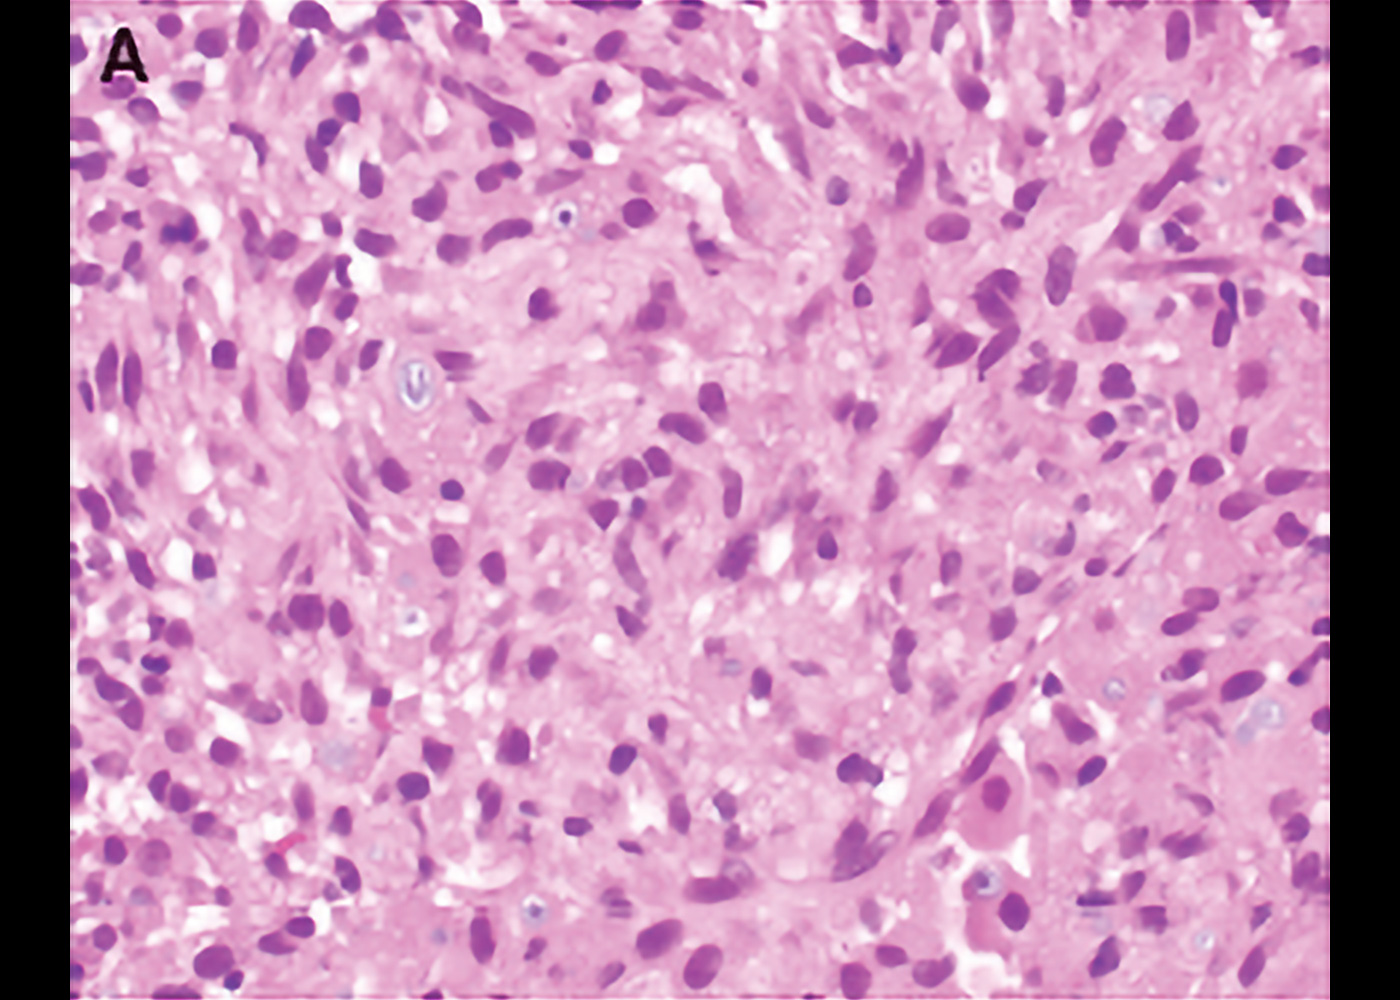 Fig 5. Transbronchial biopsy specimens demonstrated sheets of oval to spindled histiocytes some of which had light purple cytoplasmic inclusions